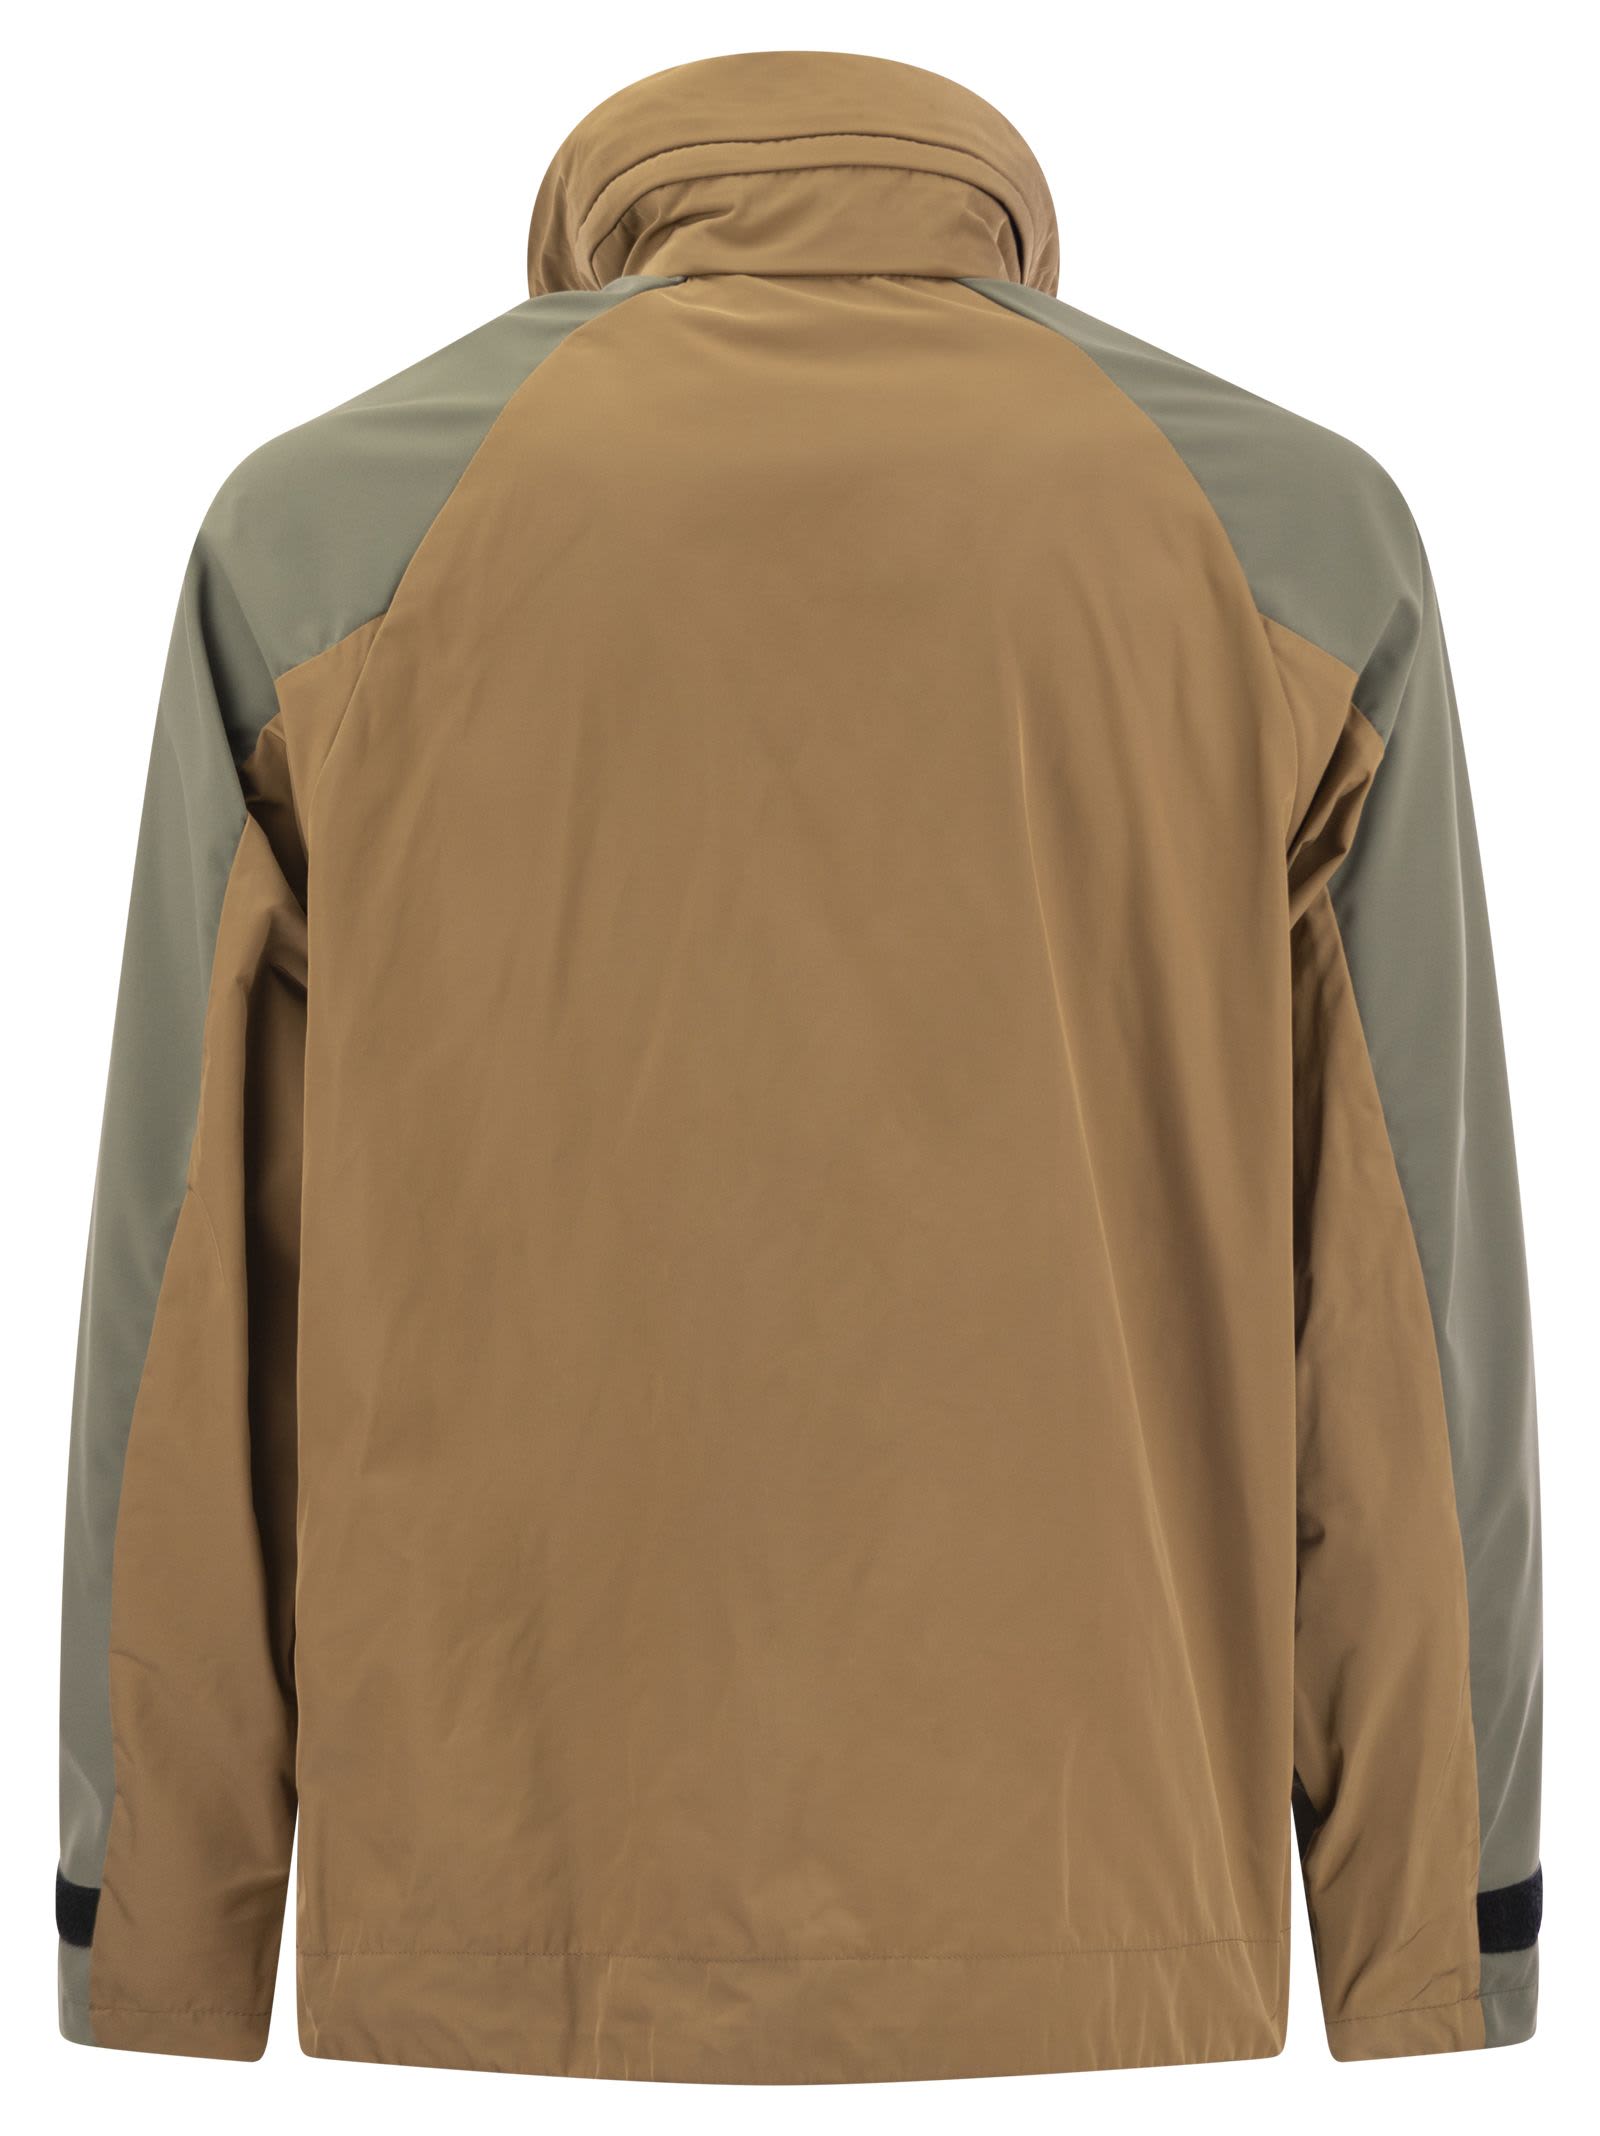 Shop Colmar Colourblock Jacket With Concealed Hood In Brown/green